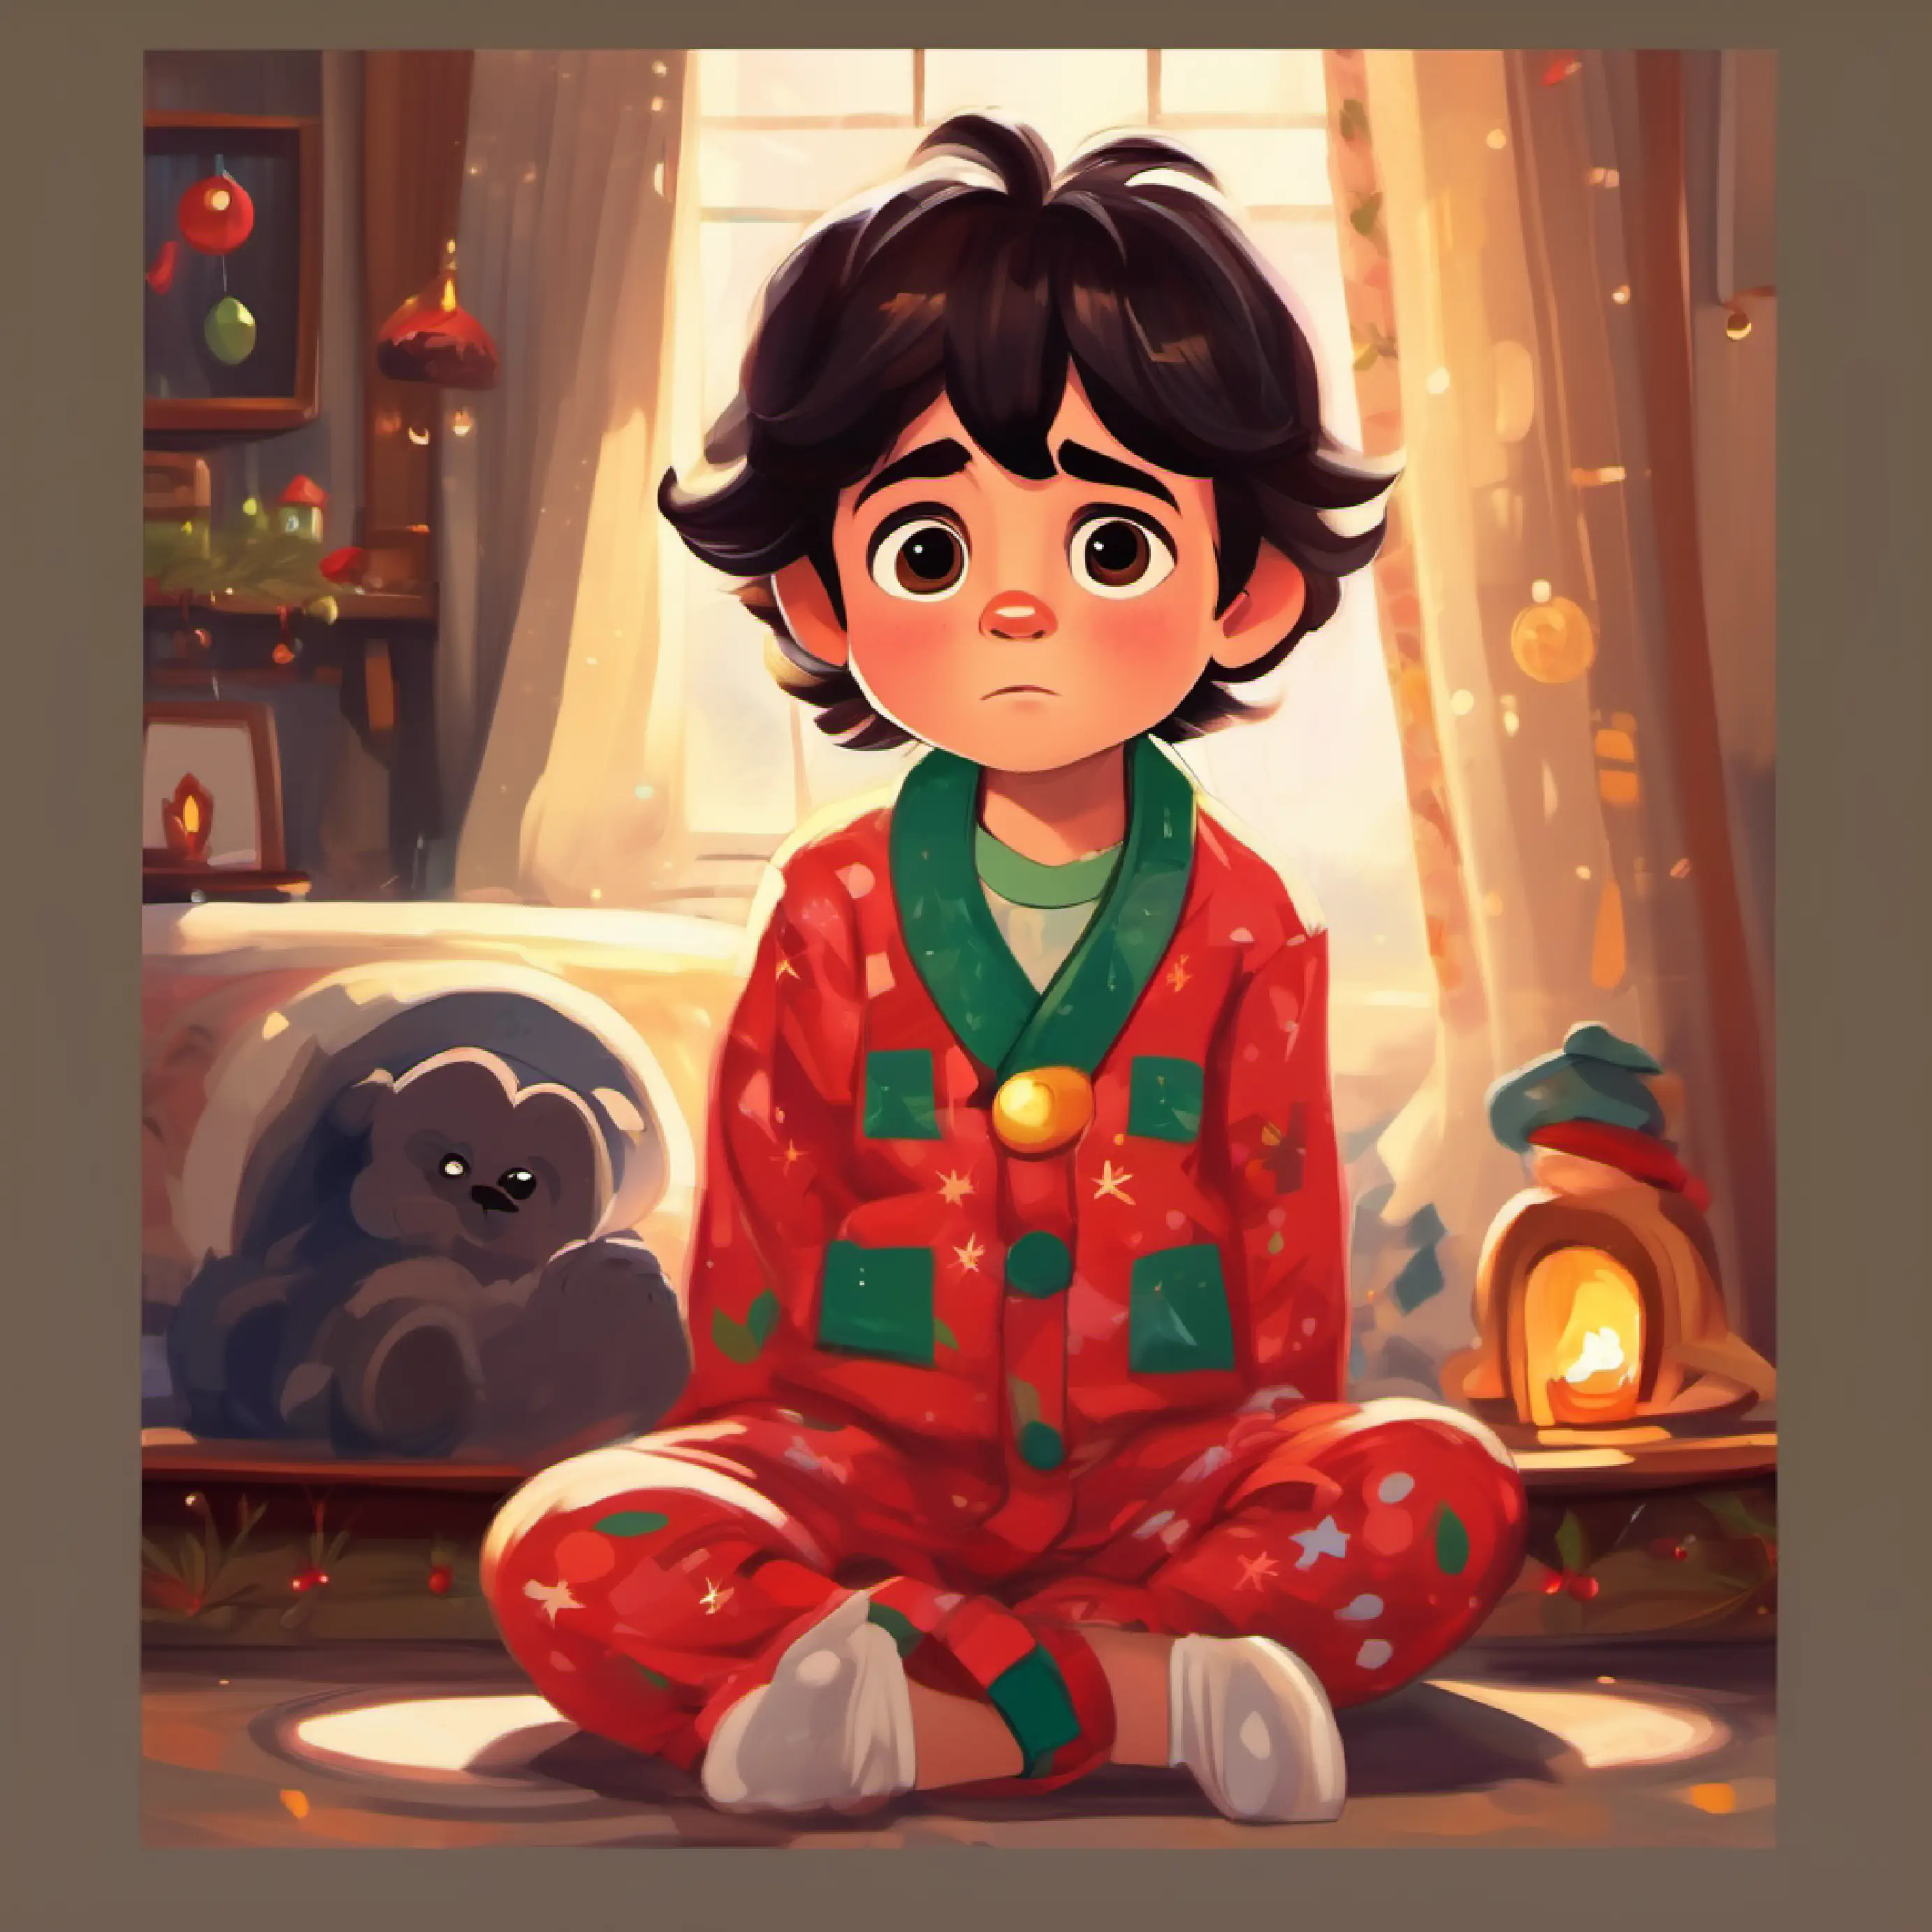 Little boy, dark hair, dark eyes, wears bright clothing grumpy in his pajamas, not wanting to change clothes.